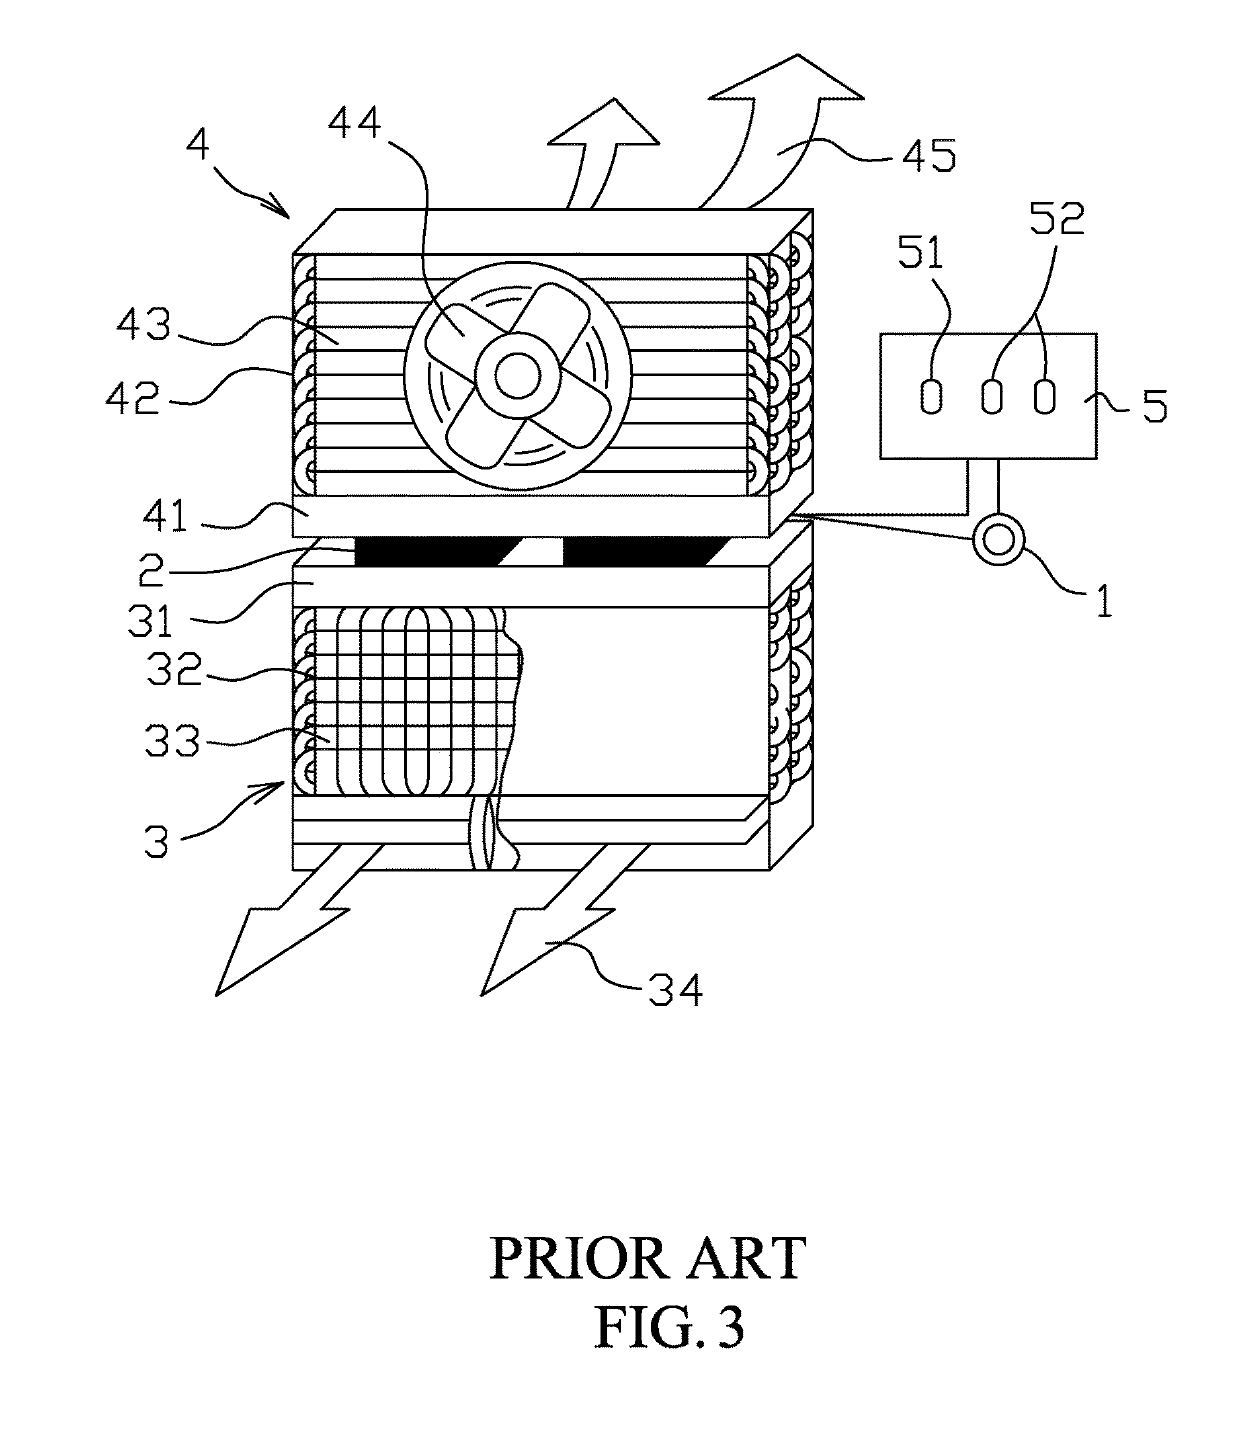 Semiconductor-based air conditioning device